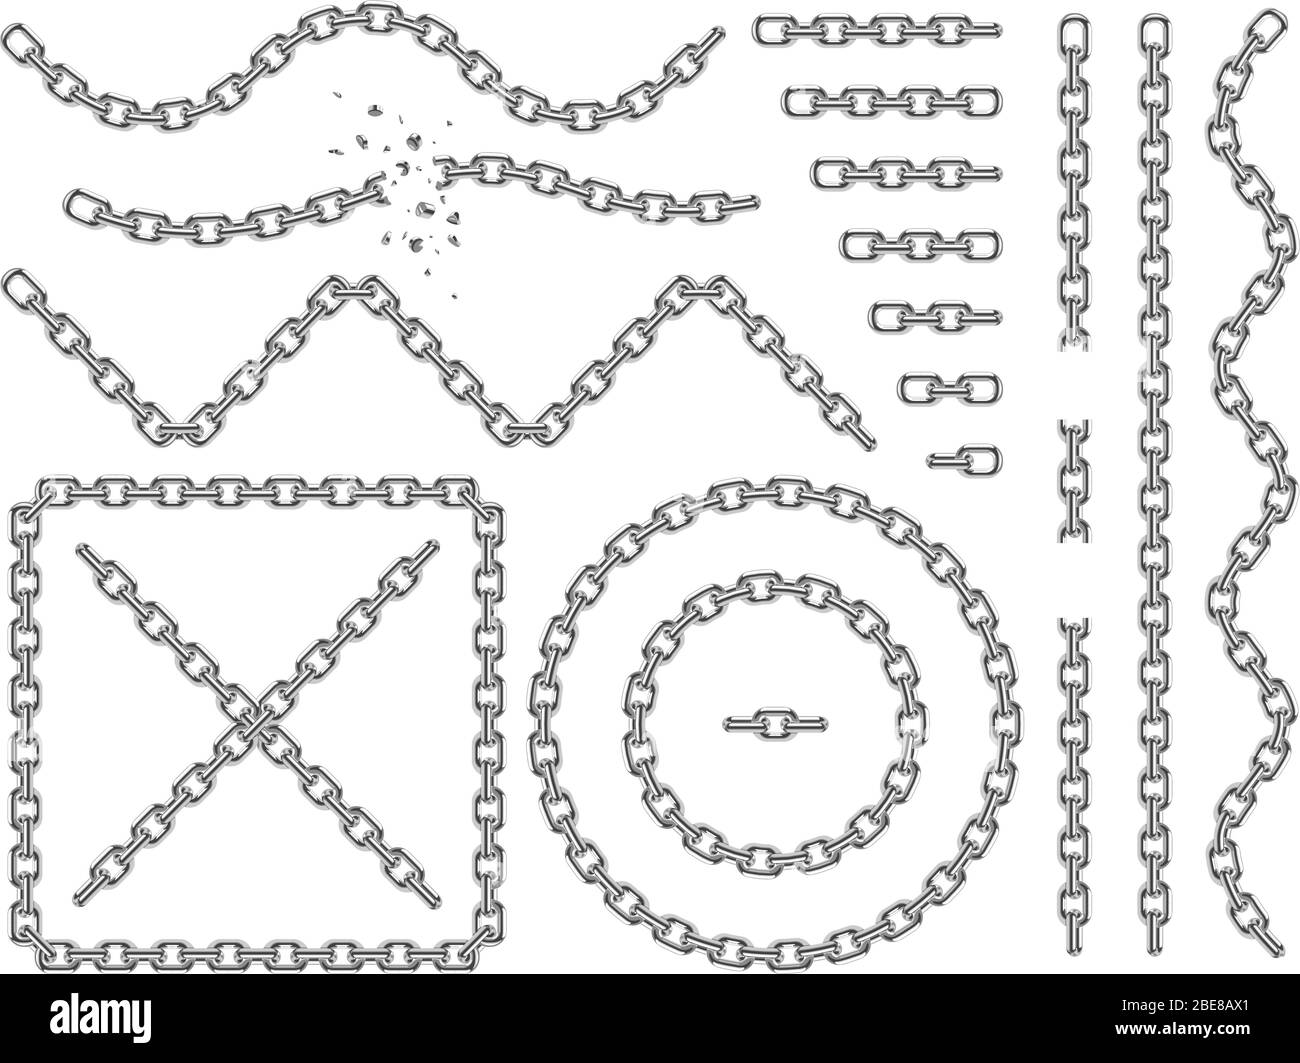 Metal vector chains isolated. Chrome chain icons and brushes set. Chain broken link, strong line connection chain illustration Stock Vector